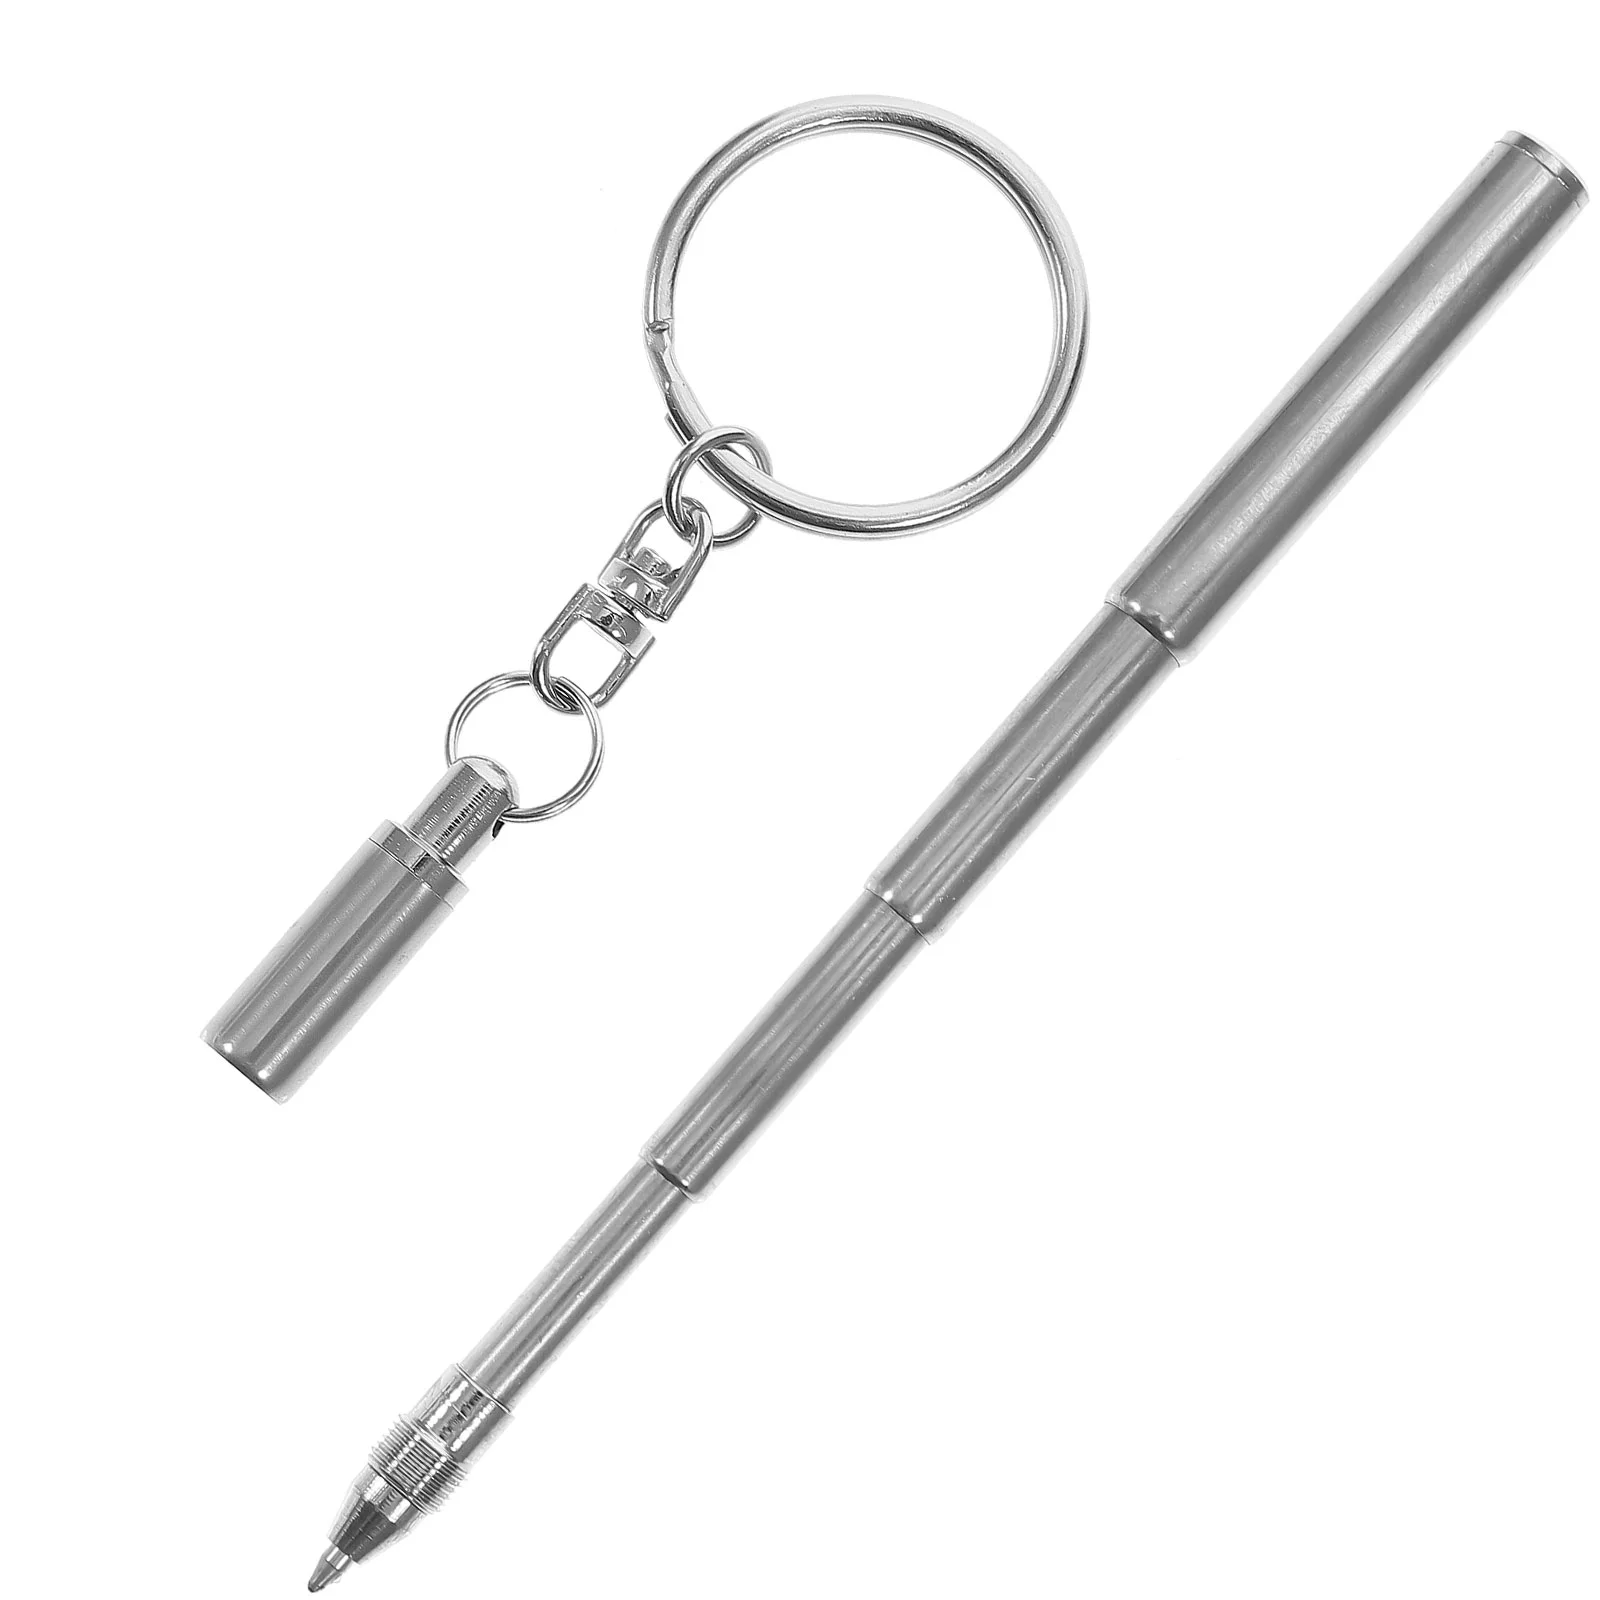 Retractable Pen Shape Keychain Mini Metal Key Ring Portable Stainless Steel Telescopic The Tools Keychain Tools mini blue tooth bt 5 3 phone selfie shutter remote control ring wireless smart remote controller page turner for ios android